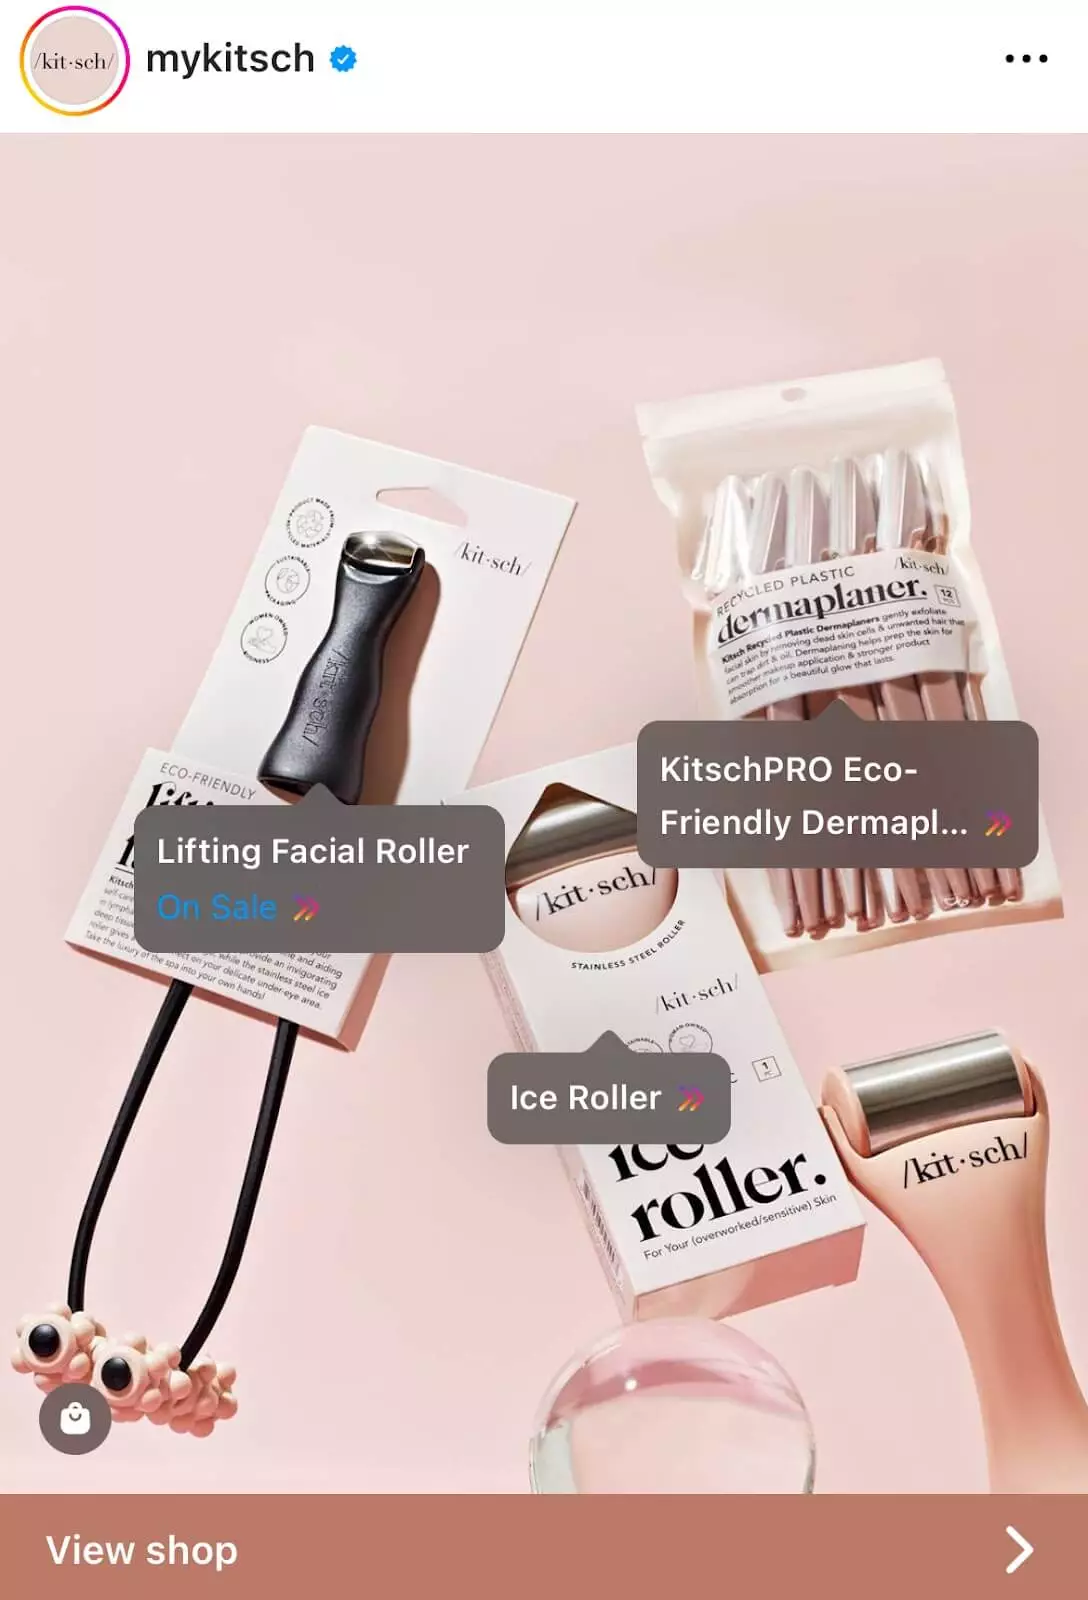 Mykitsch promotes their lifting facial roller, eco-friendly dermaplaner, and ice roller in a sleek Instagram post.